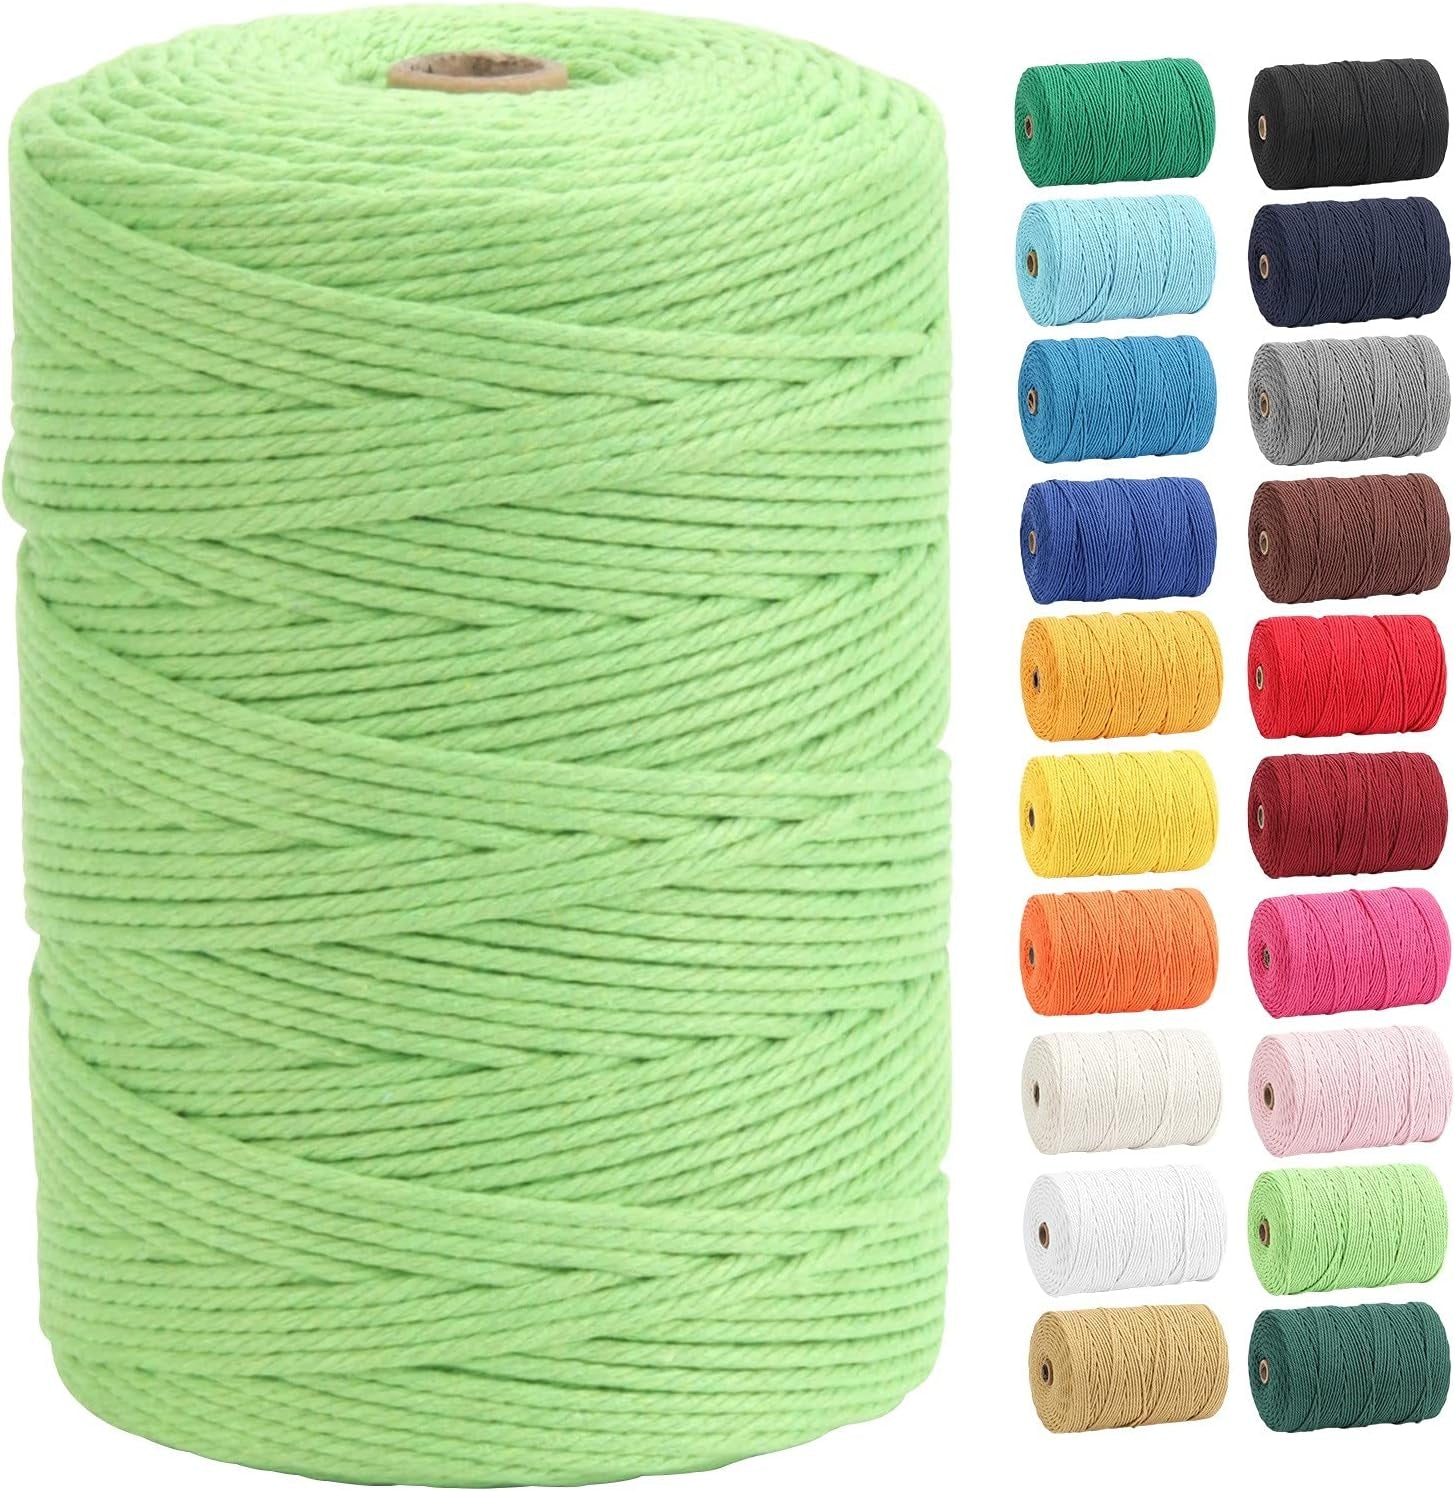 Macrame Cord,  100% Natural Cotton Rope 3Mm X 328 Yards 4 Strand Twisted Macrame Rope Cotton Twine String for DIY Crafts Knitting Dream Catcher Plant Hanger Wedding Decor